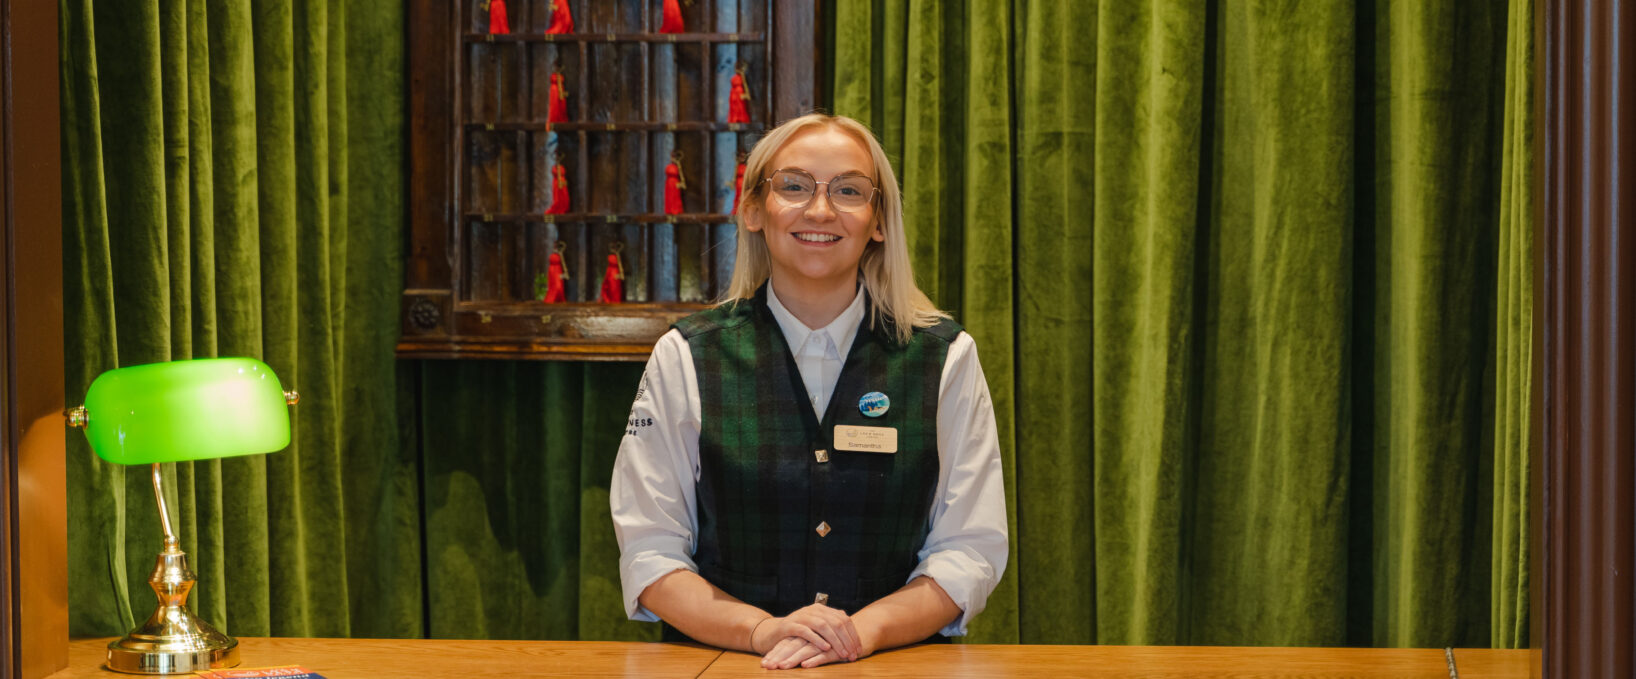 A smiling women standing at the admissions desk in Loch Ness tartan ready to welcome guests to The Loch Ness Centre